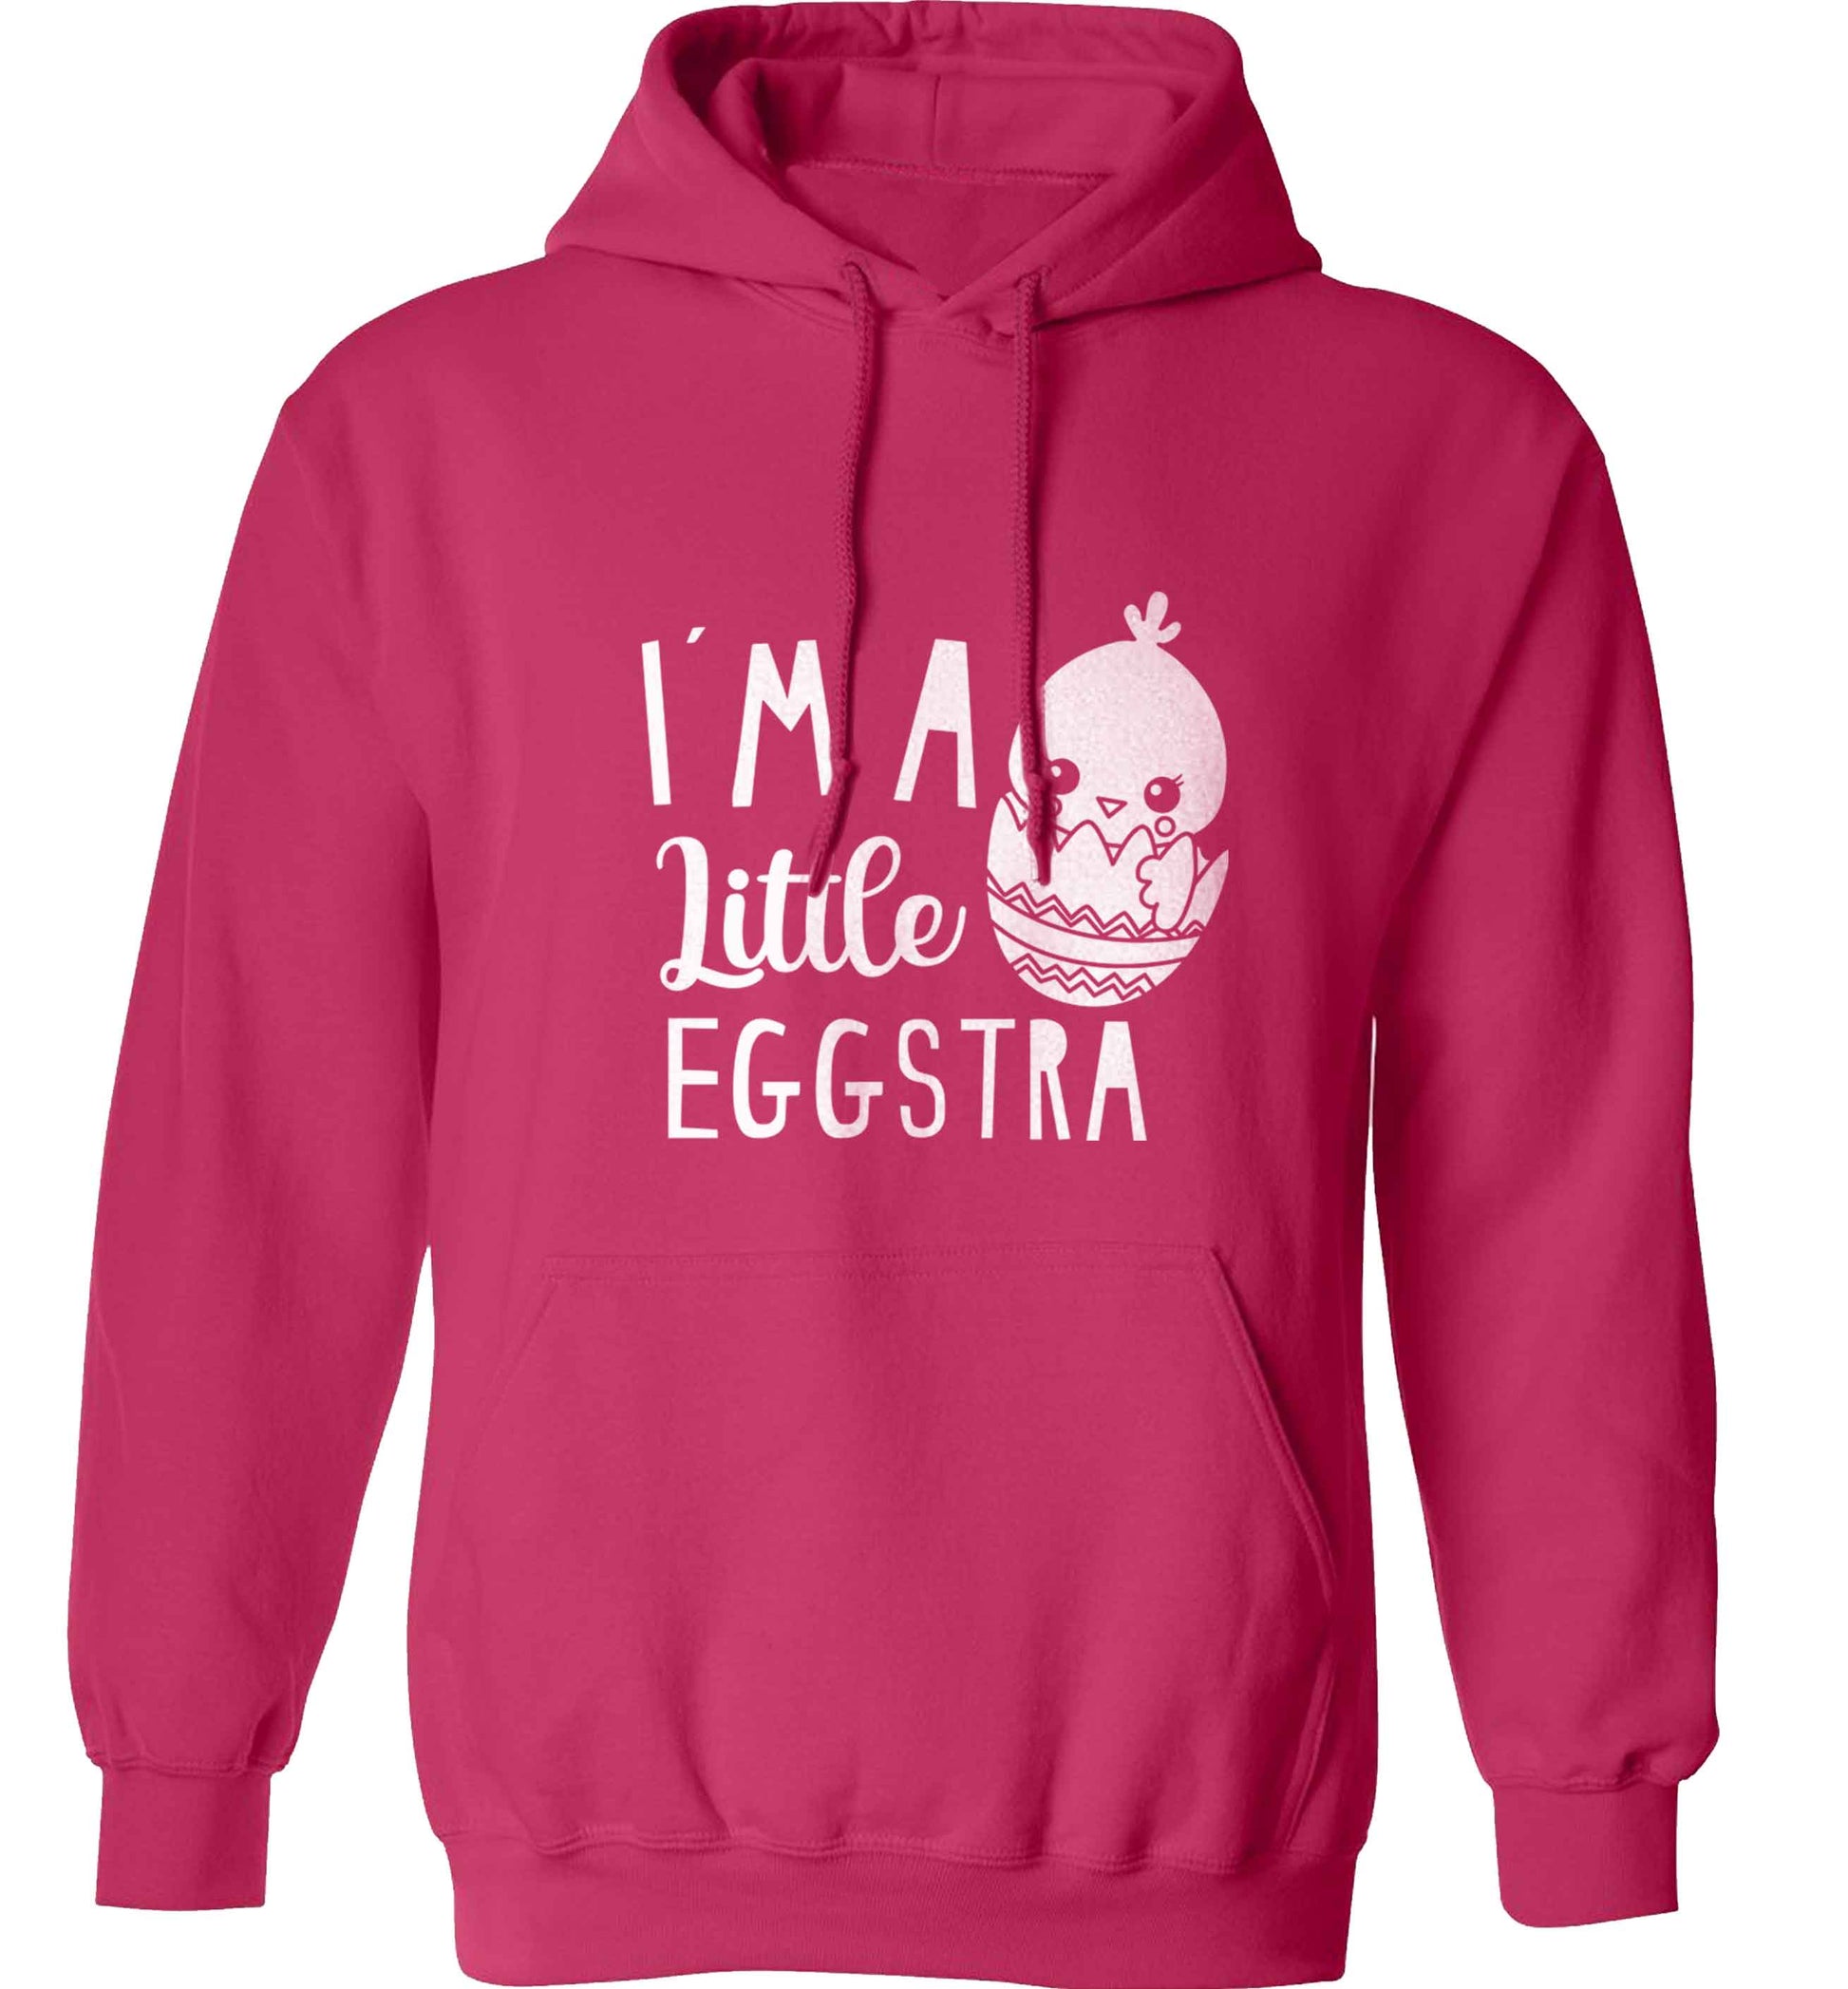 I'm a little eggstra adults unisex pink hoodie 2XL